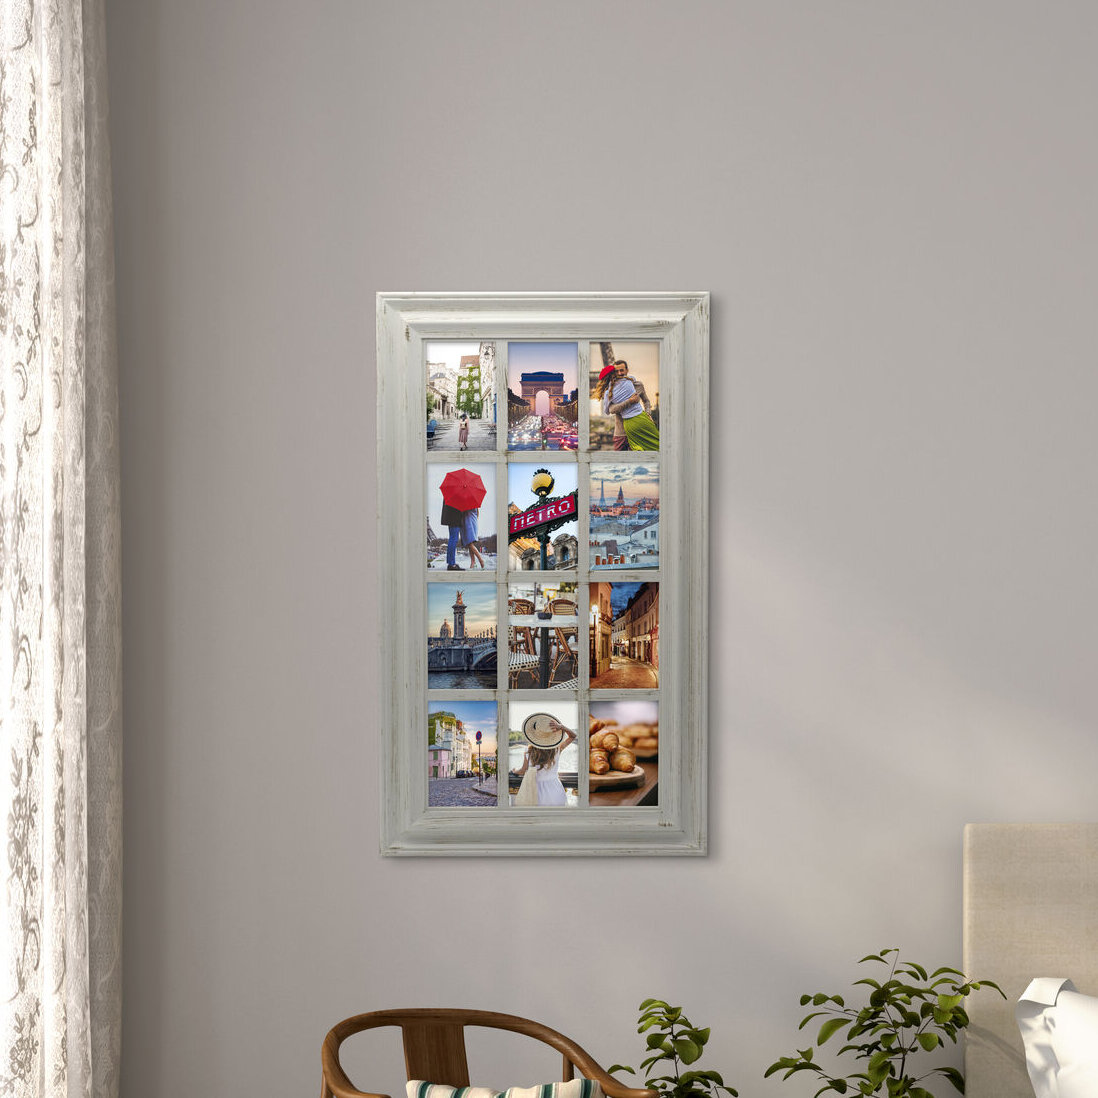 Melannco 12 Opening Collage Frame, Displays 4x6 and Six 6x4 Inch Photos,  Black